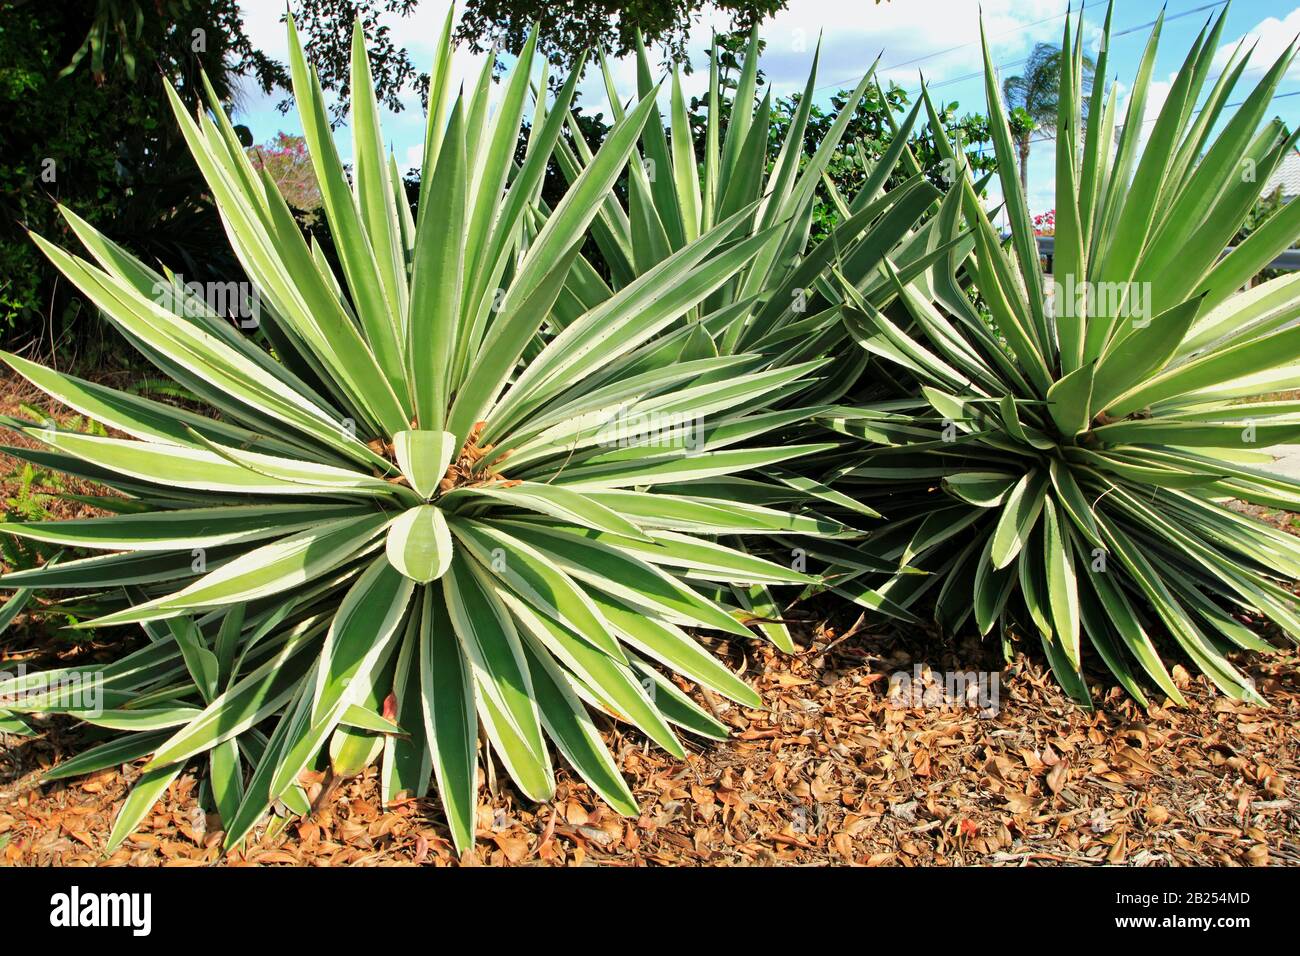 Agave americana, common names sentry plant, century plant, maguey or American aloe, is a species of flowering plant in the family Asparagaceae Stock Photo